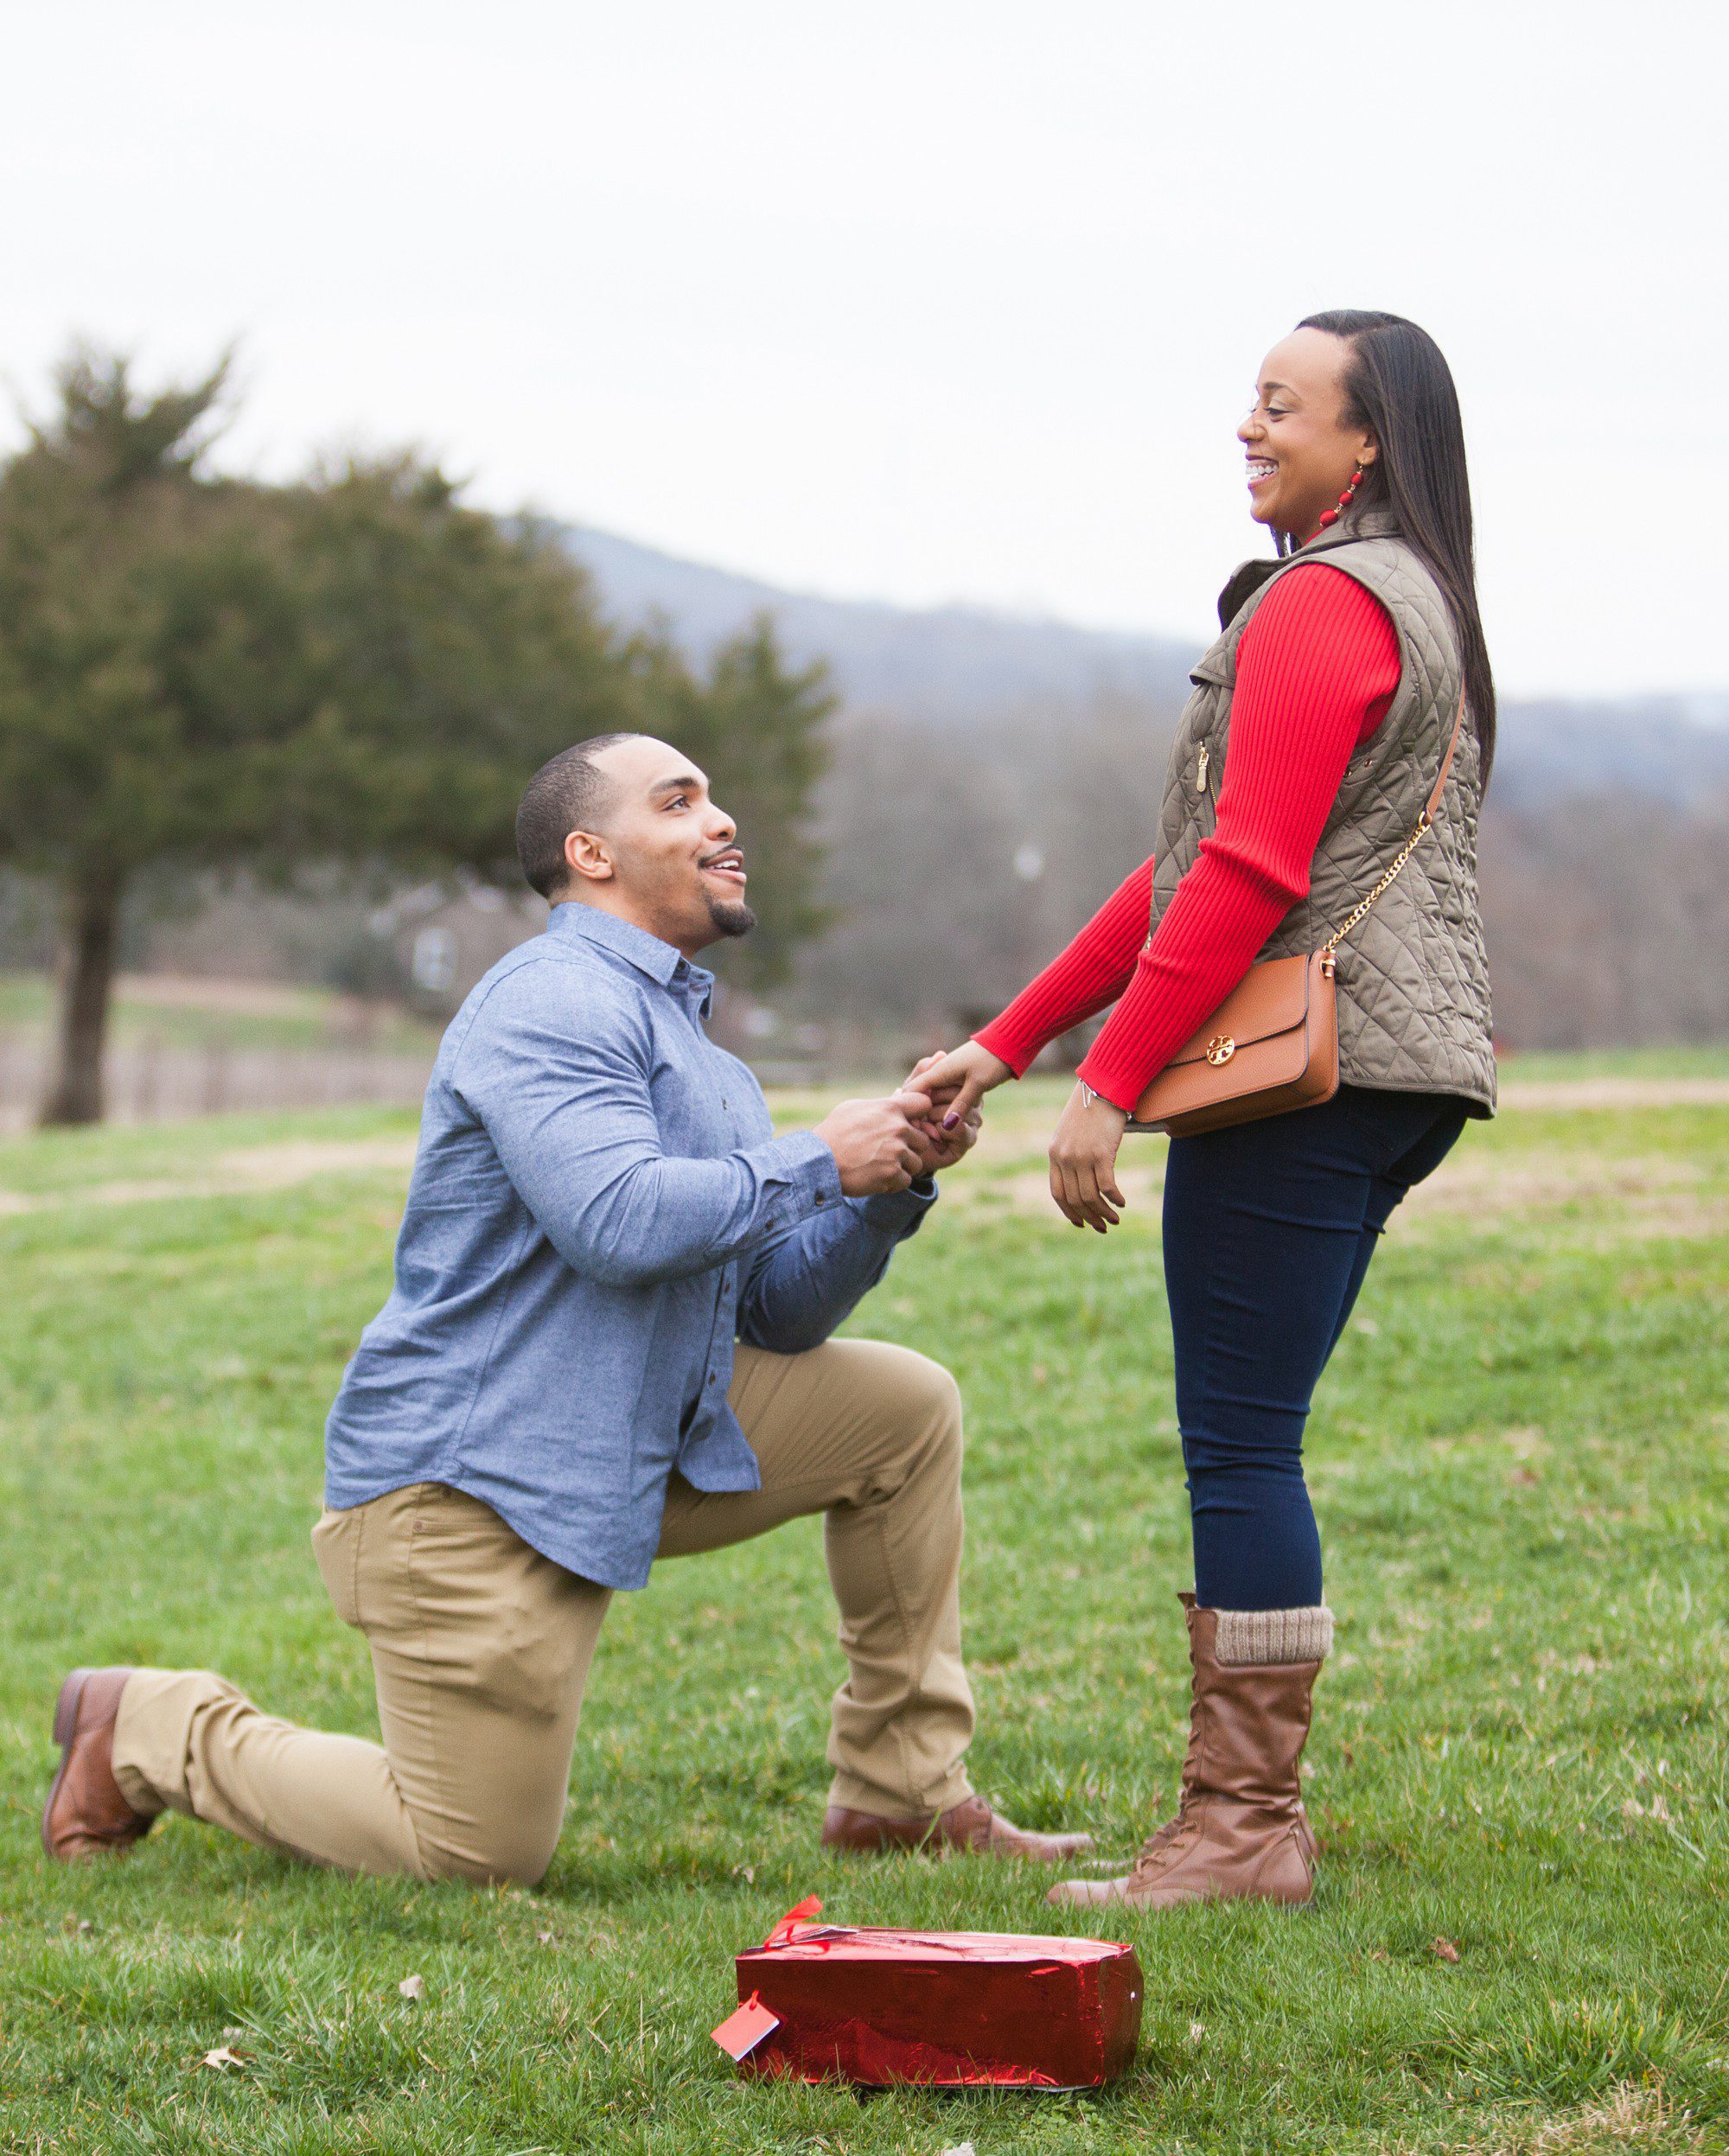 Nick gets down on one knee to propose, From Nick and Tiffany's surprise proposal at Arrington Vineyards just outside of Nashville TN 